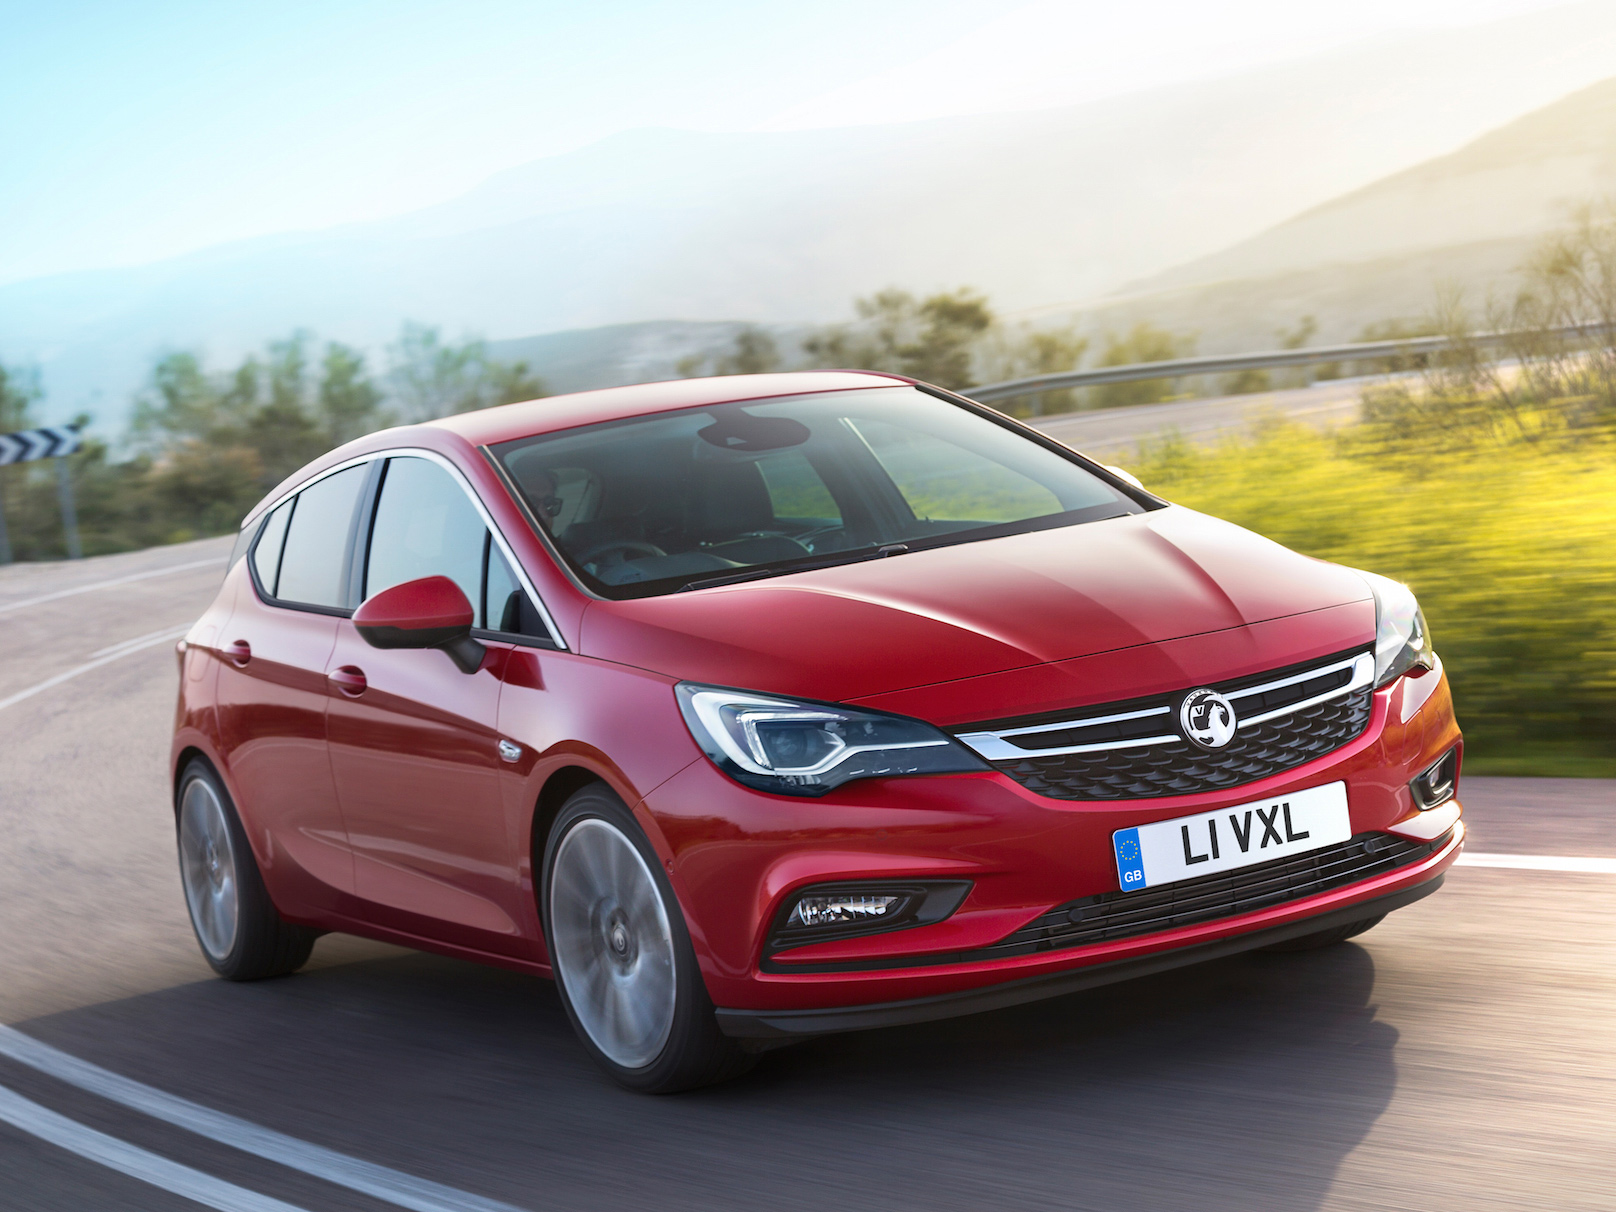 all-new Astra